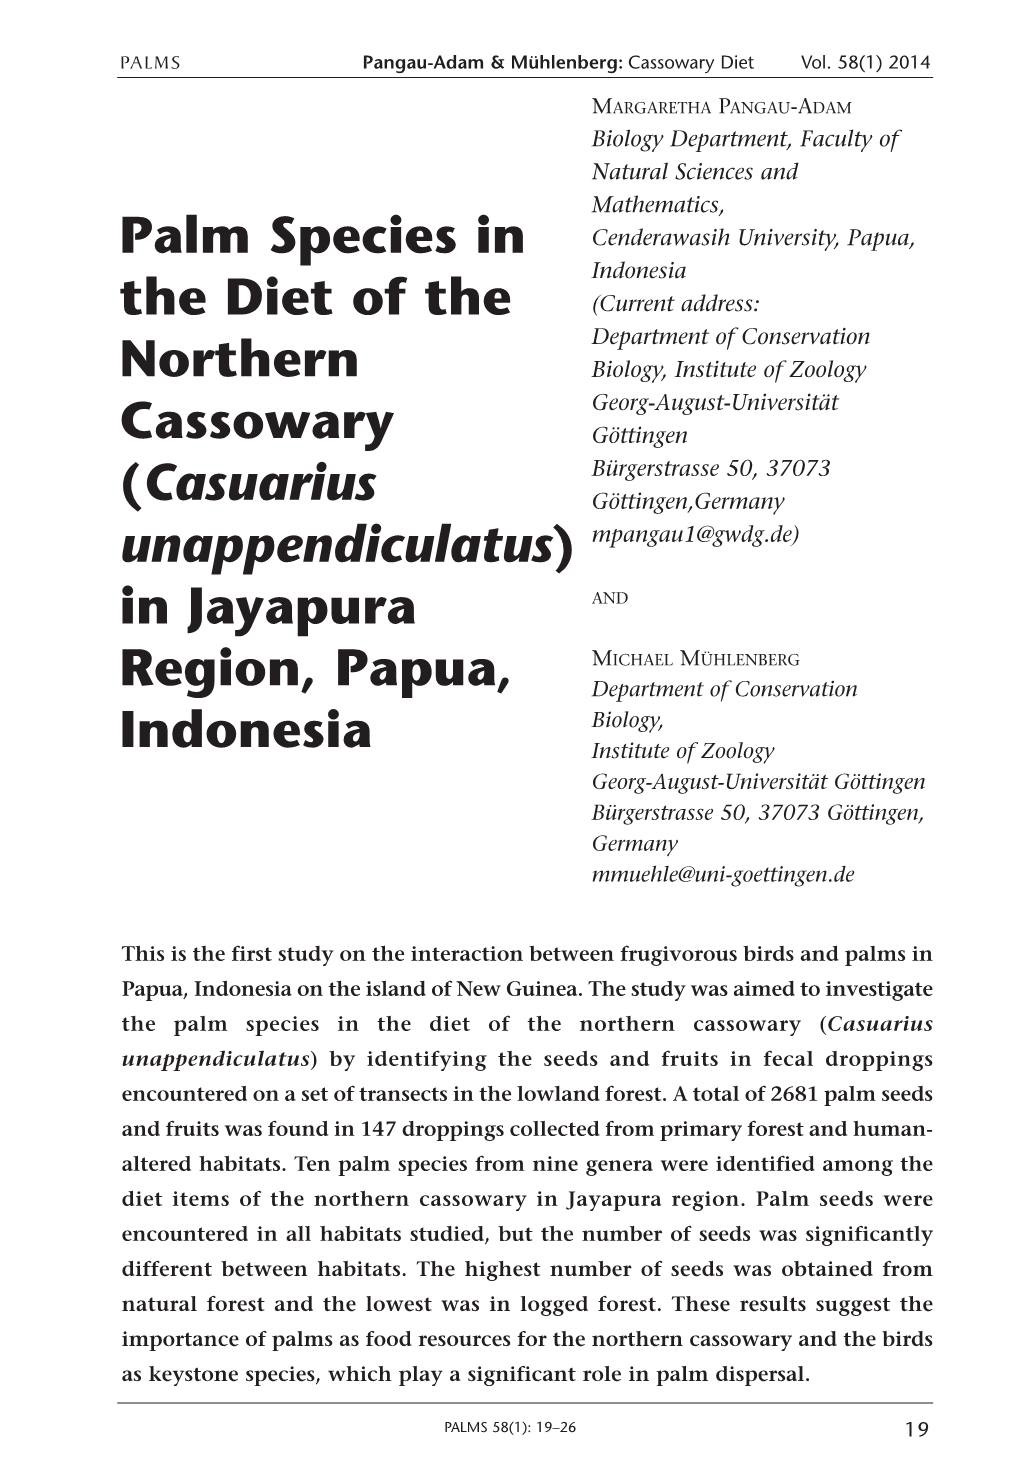 Palm Species in the Diet of the Northern Cassowary (Casuarius